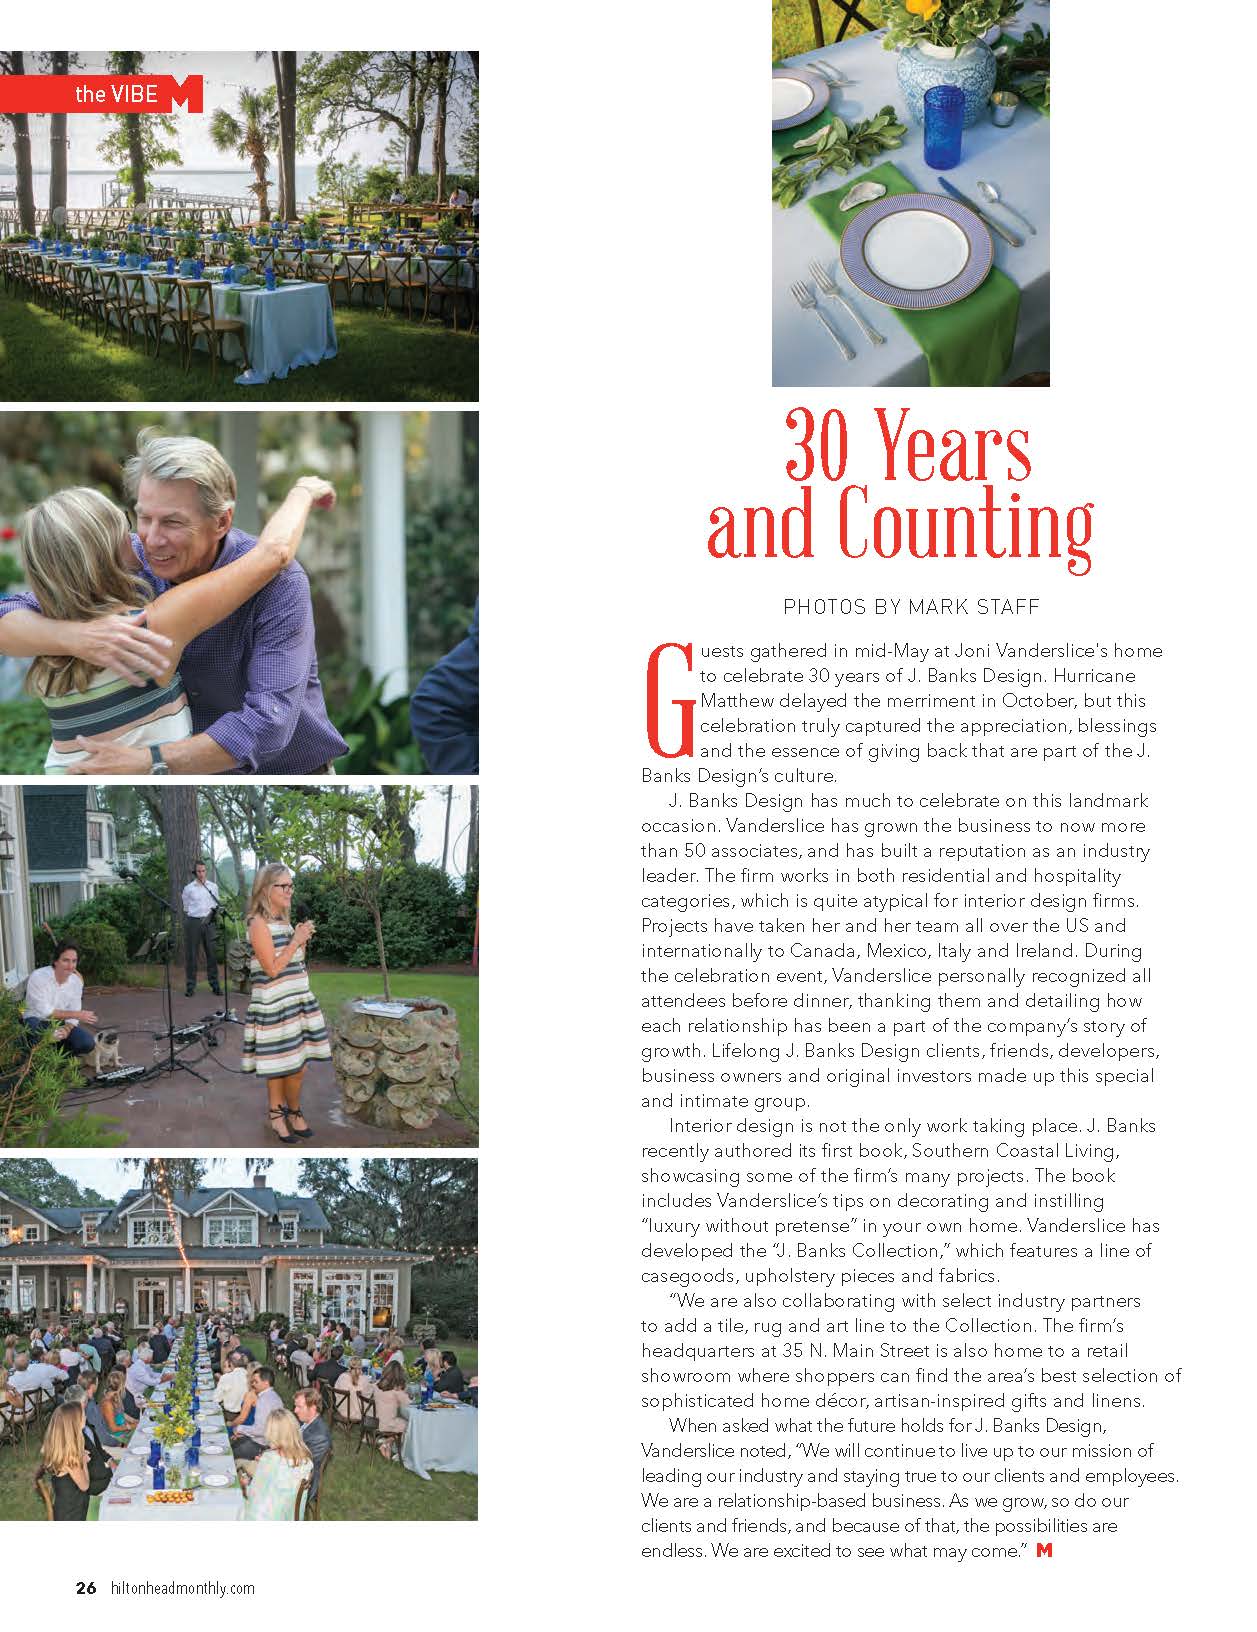 30th anniversary of j banks design celebrated by hilton head monthly magazine